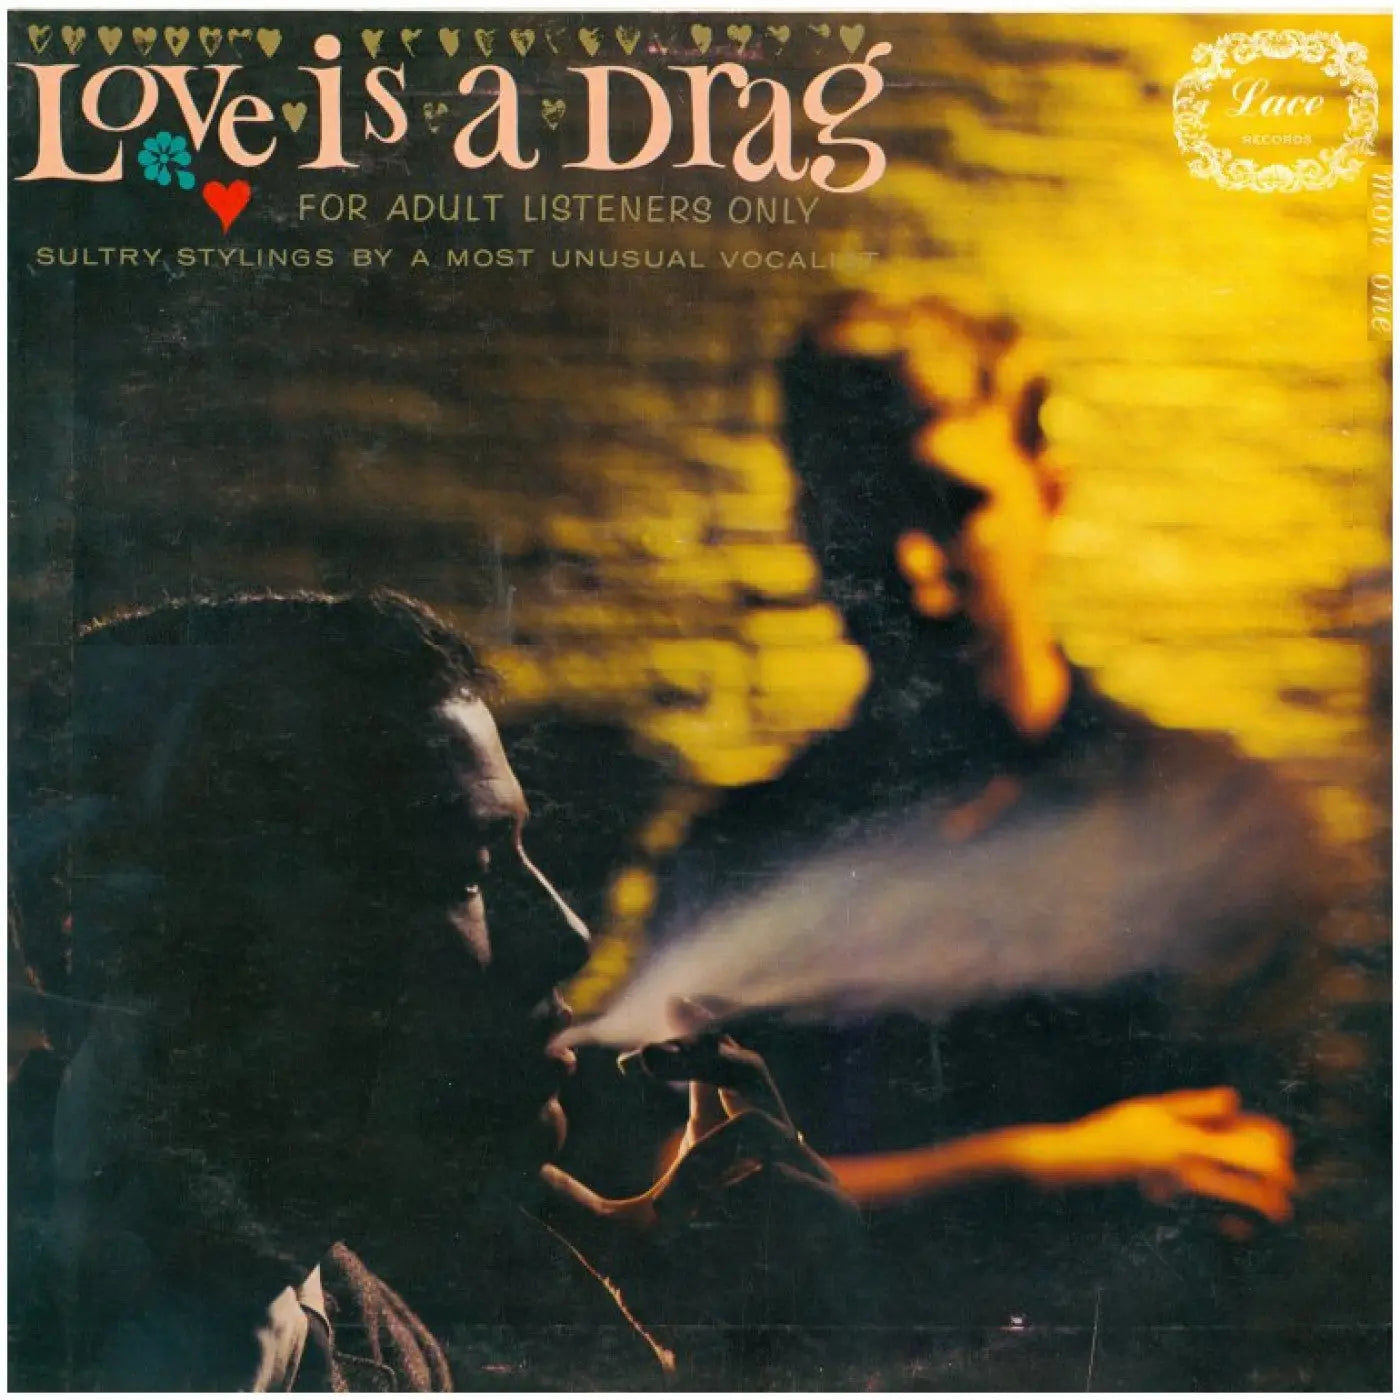 Love Is a Drag - For Adult Listeners Only [Indie Exclusive Gold Colored Vinyl]